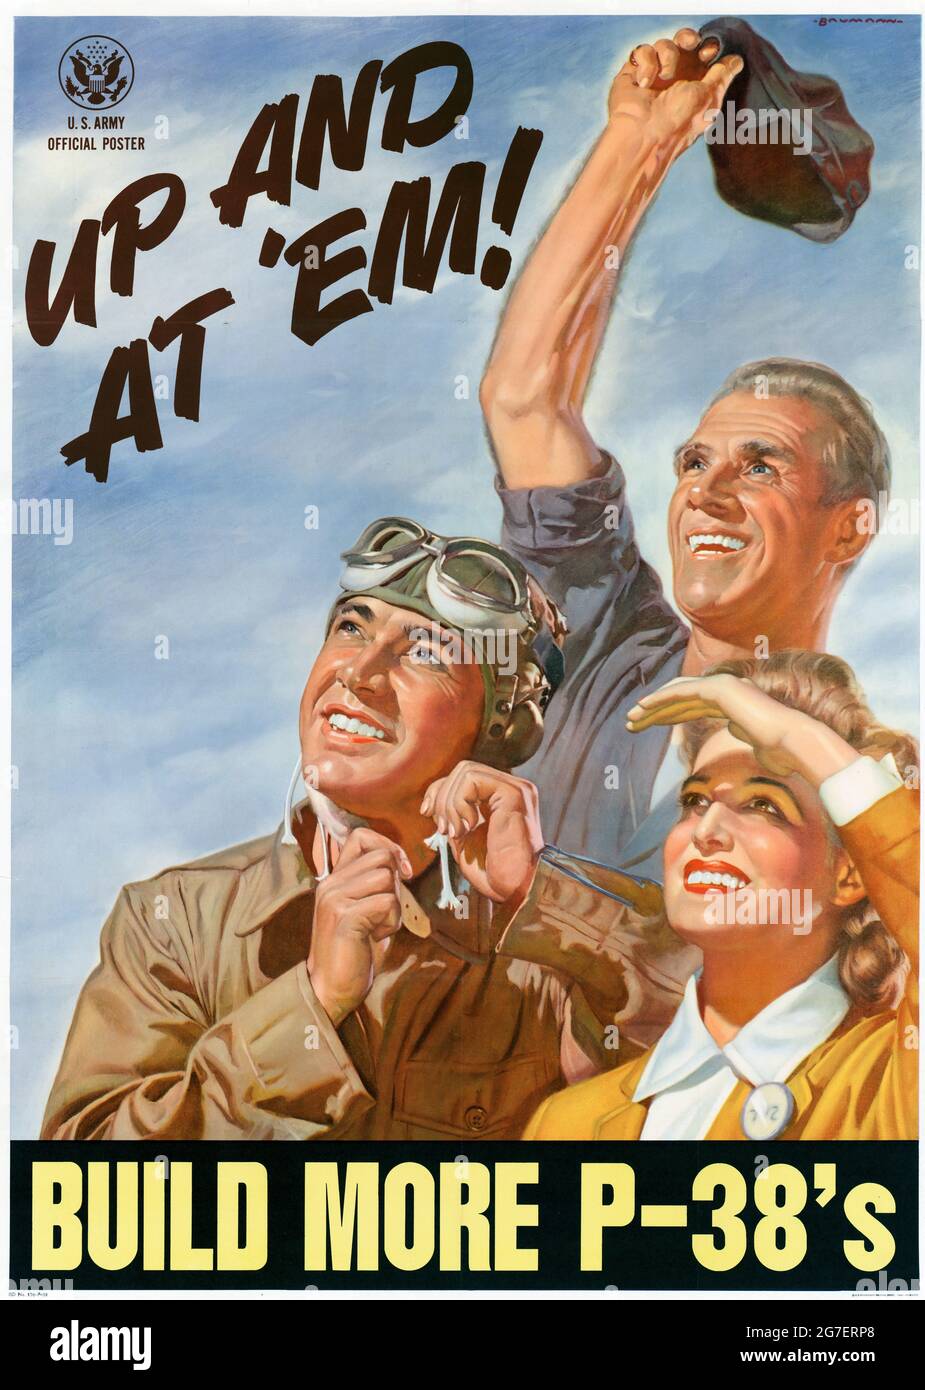 Up and at 'em - Build more P-38s - World War II American Home Front Poster Stock Photo